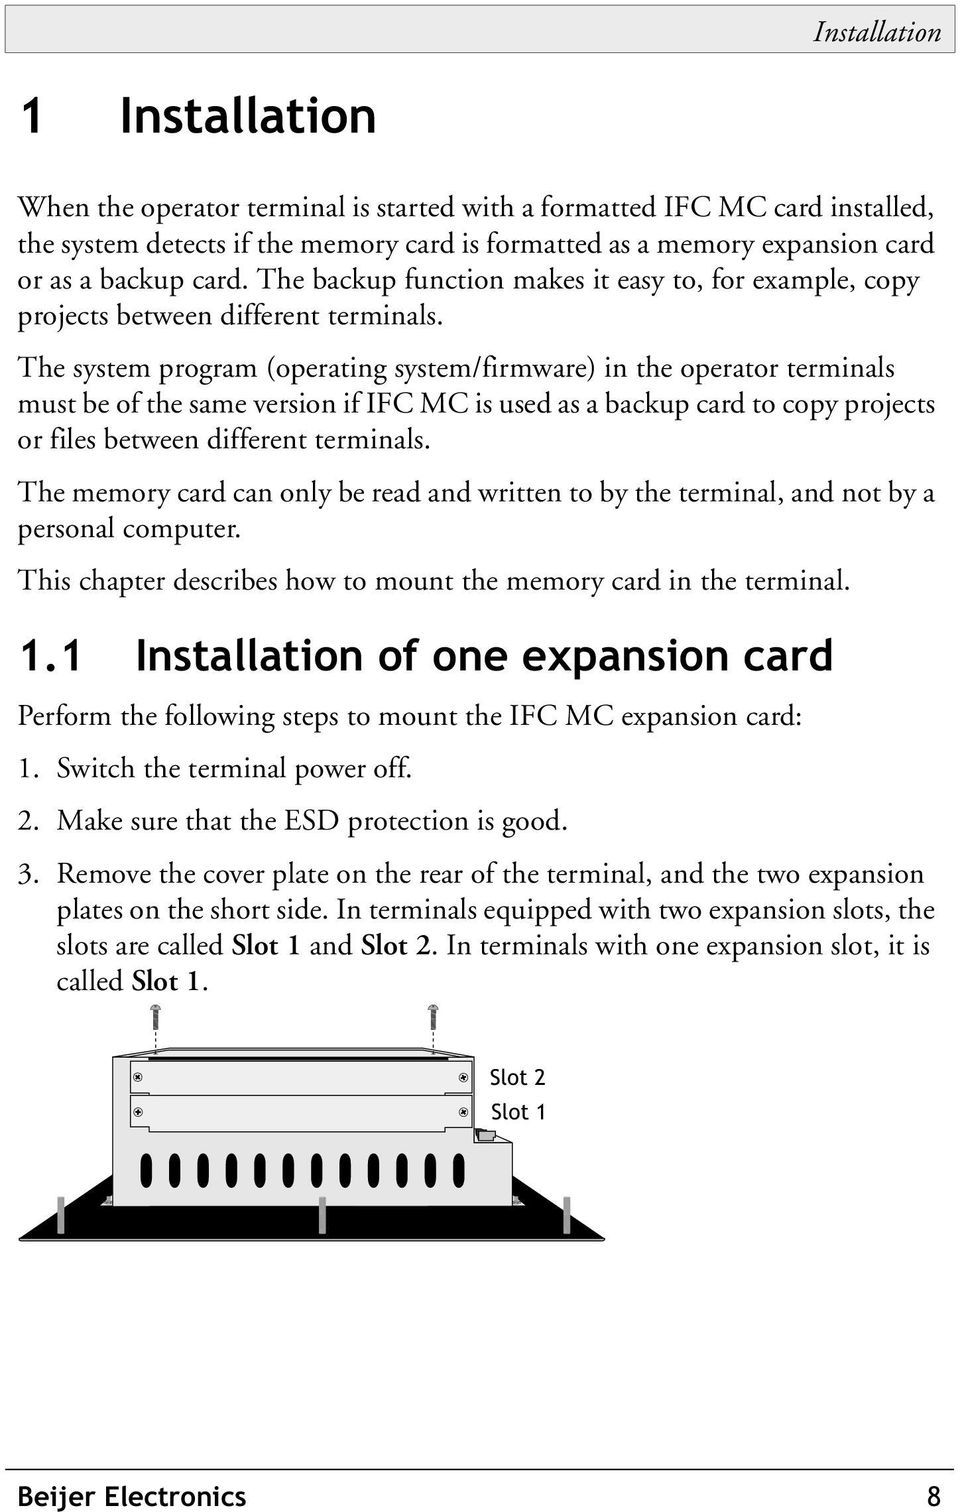 The system program (operating system/firmware) in the operator terminals must be of the same version if IFC MC is used as a backup card to copy projects or files between different terminals.